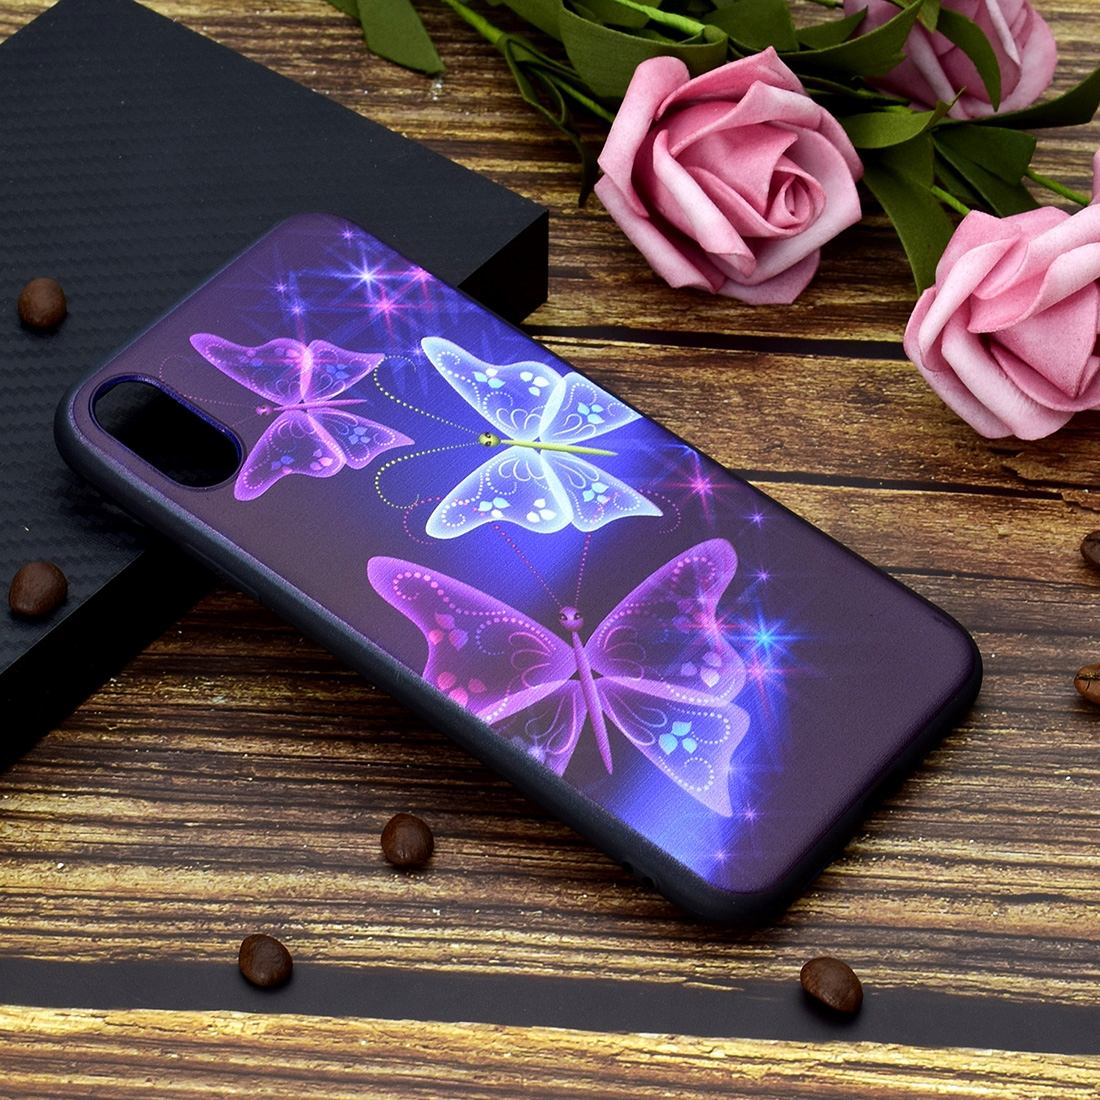 Painted Soft TPU Protective Case For iPhone XR,Starry Sky Butterflies